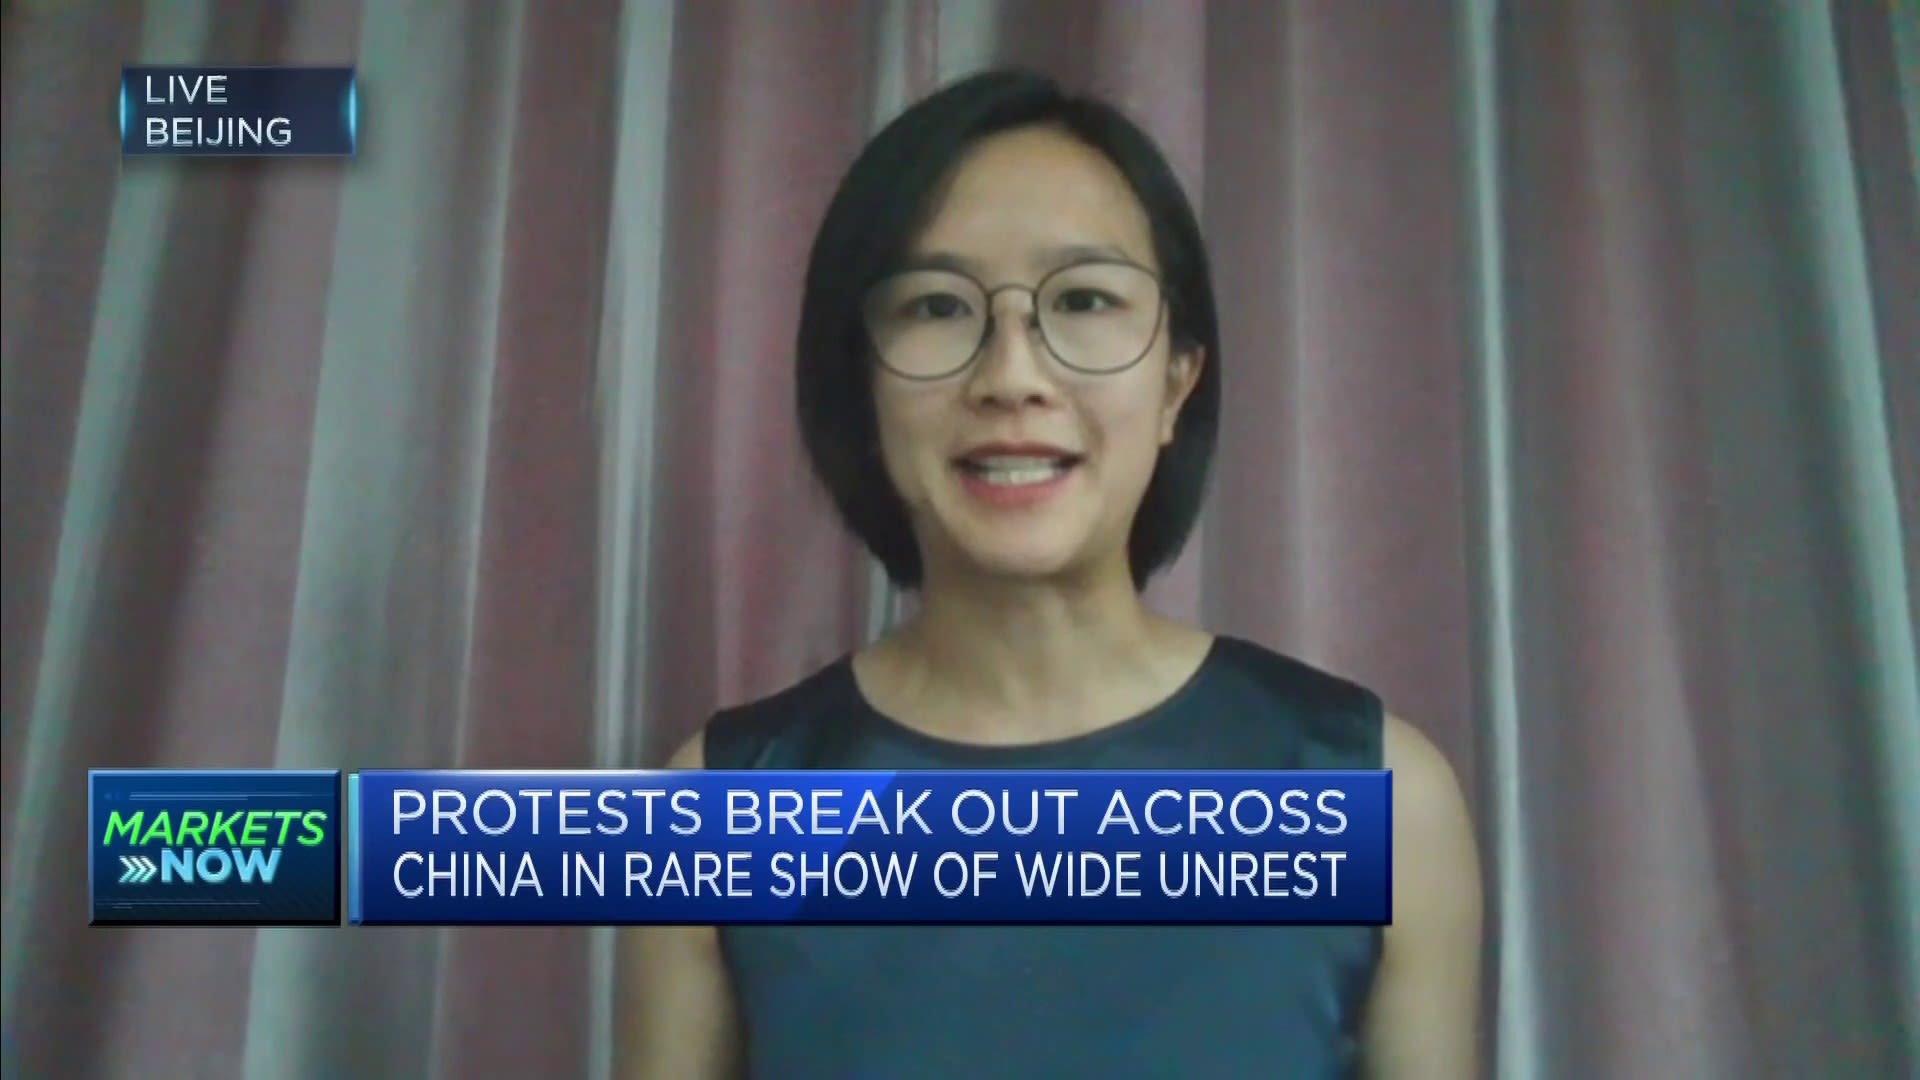 People in China are losing patience with Covid controls as protests break out